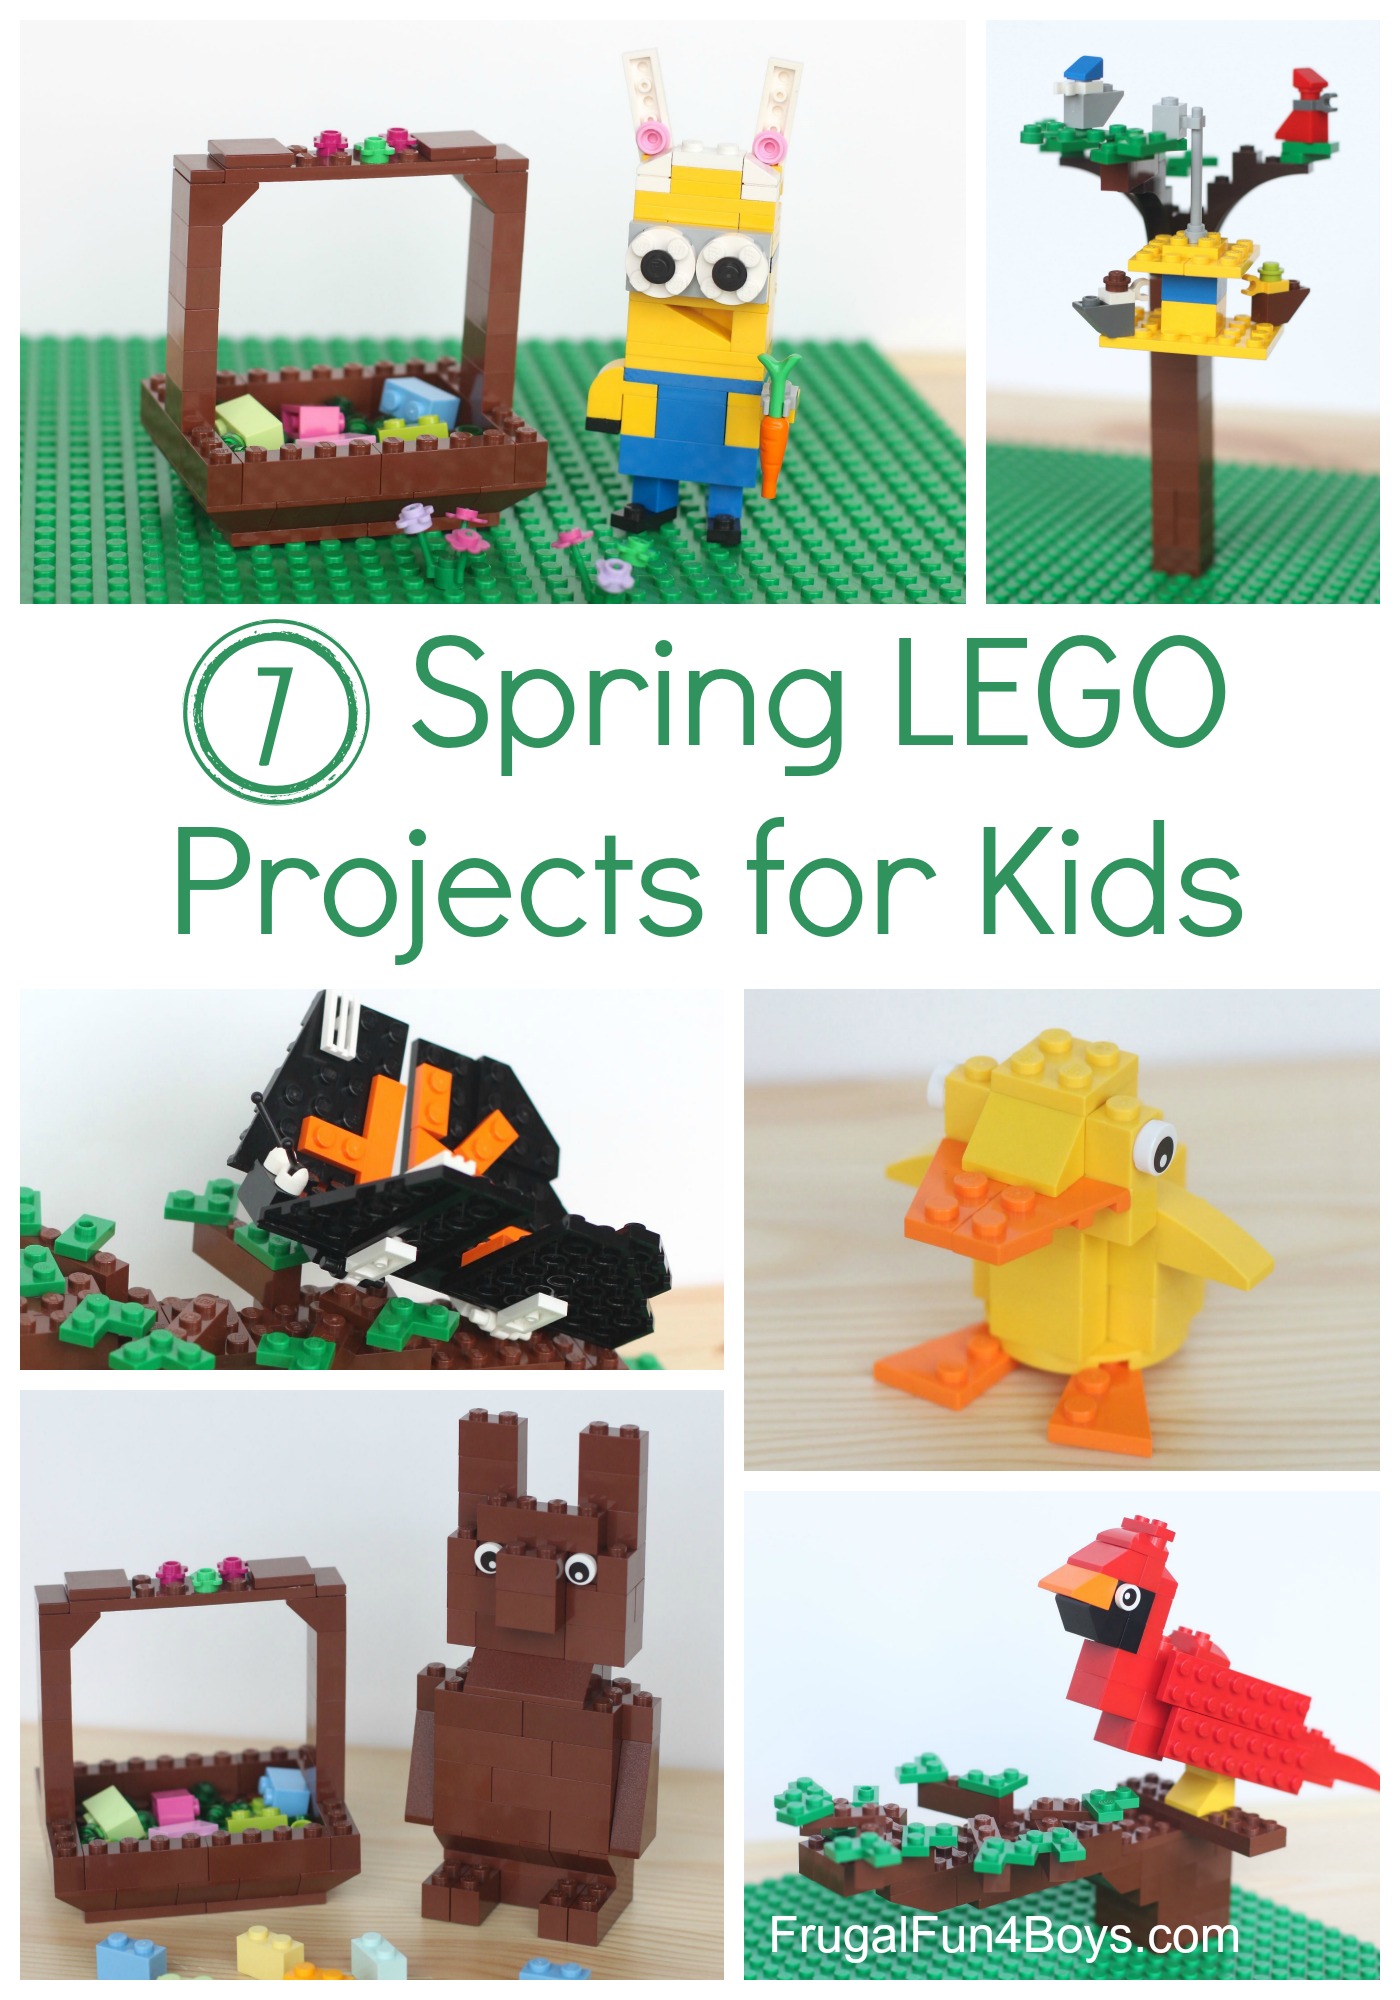 7 Spring Lego Projects to Build